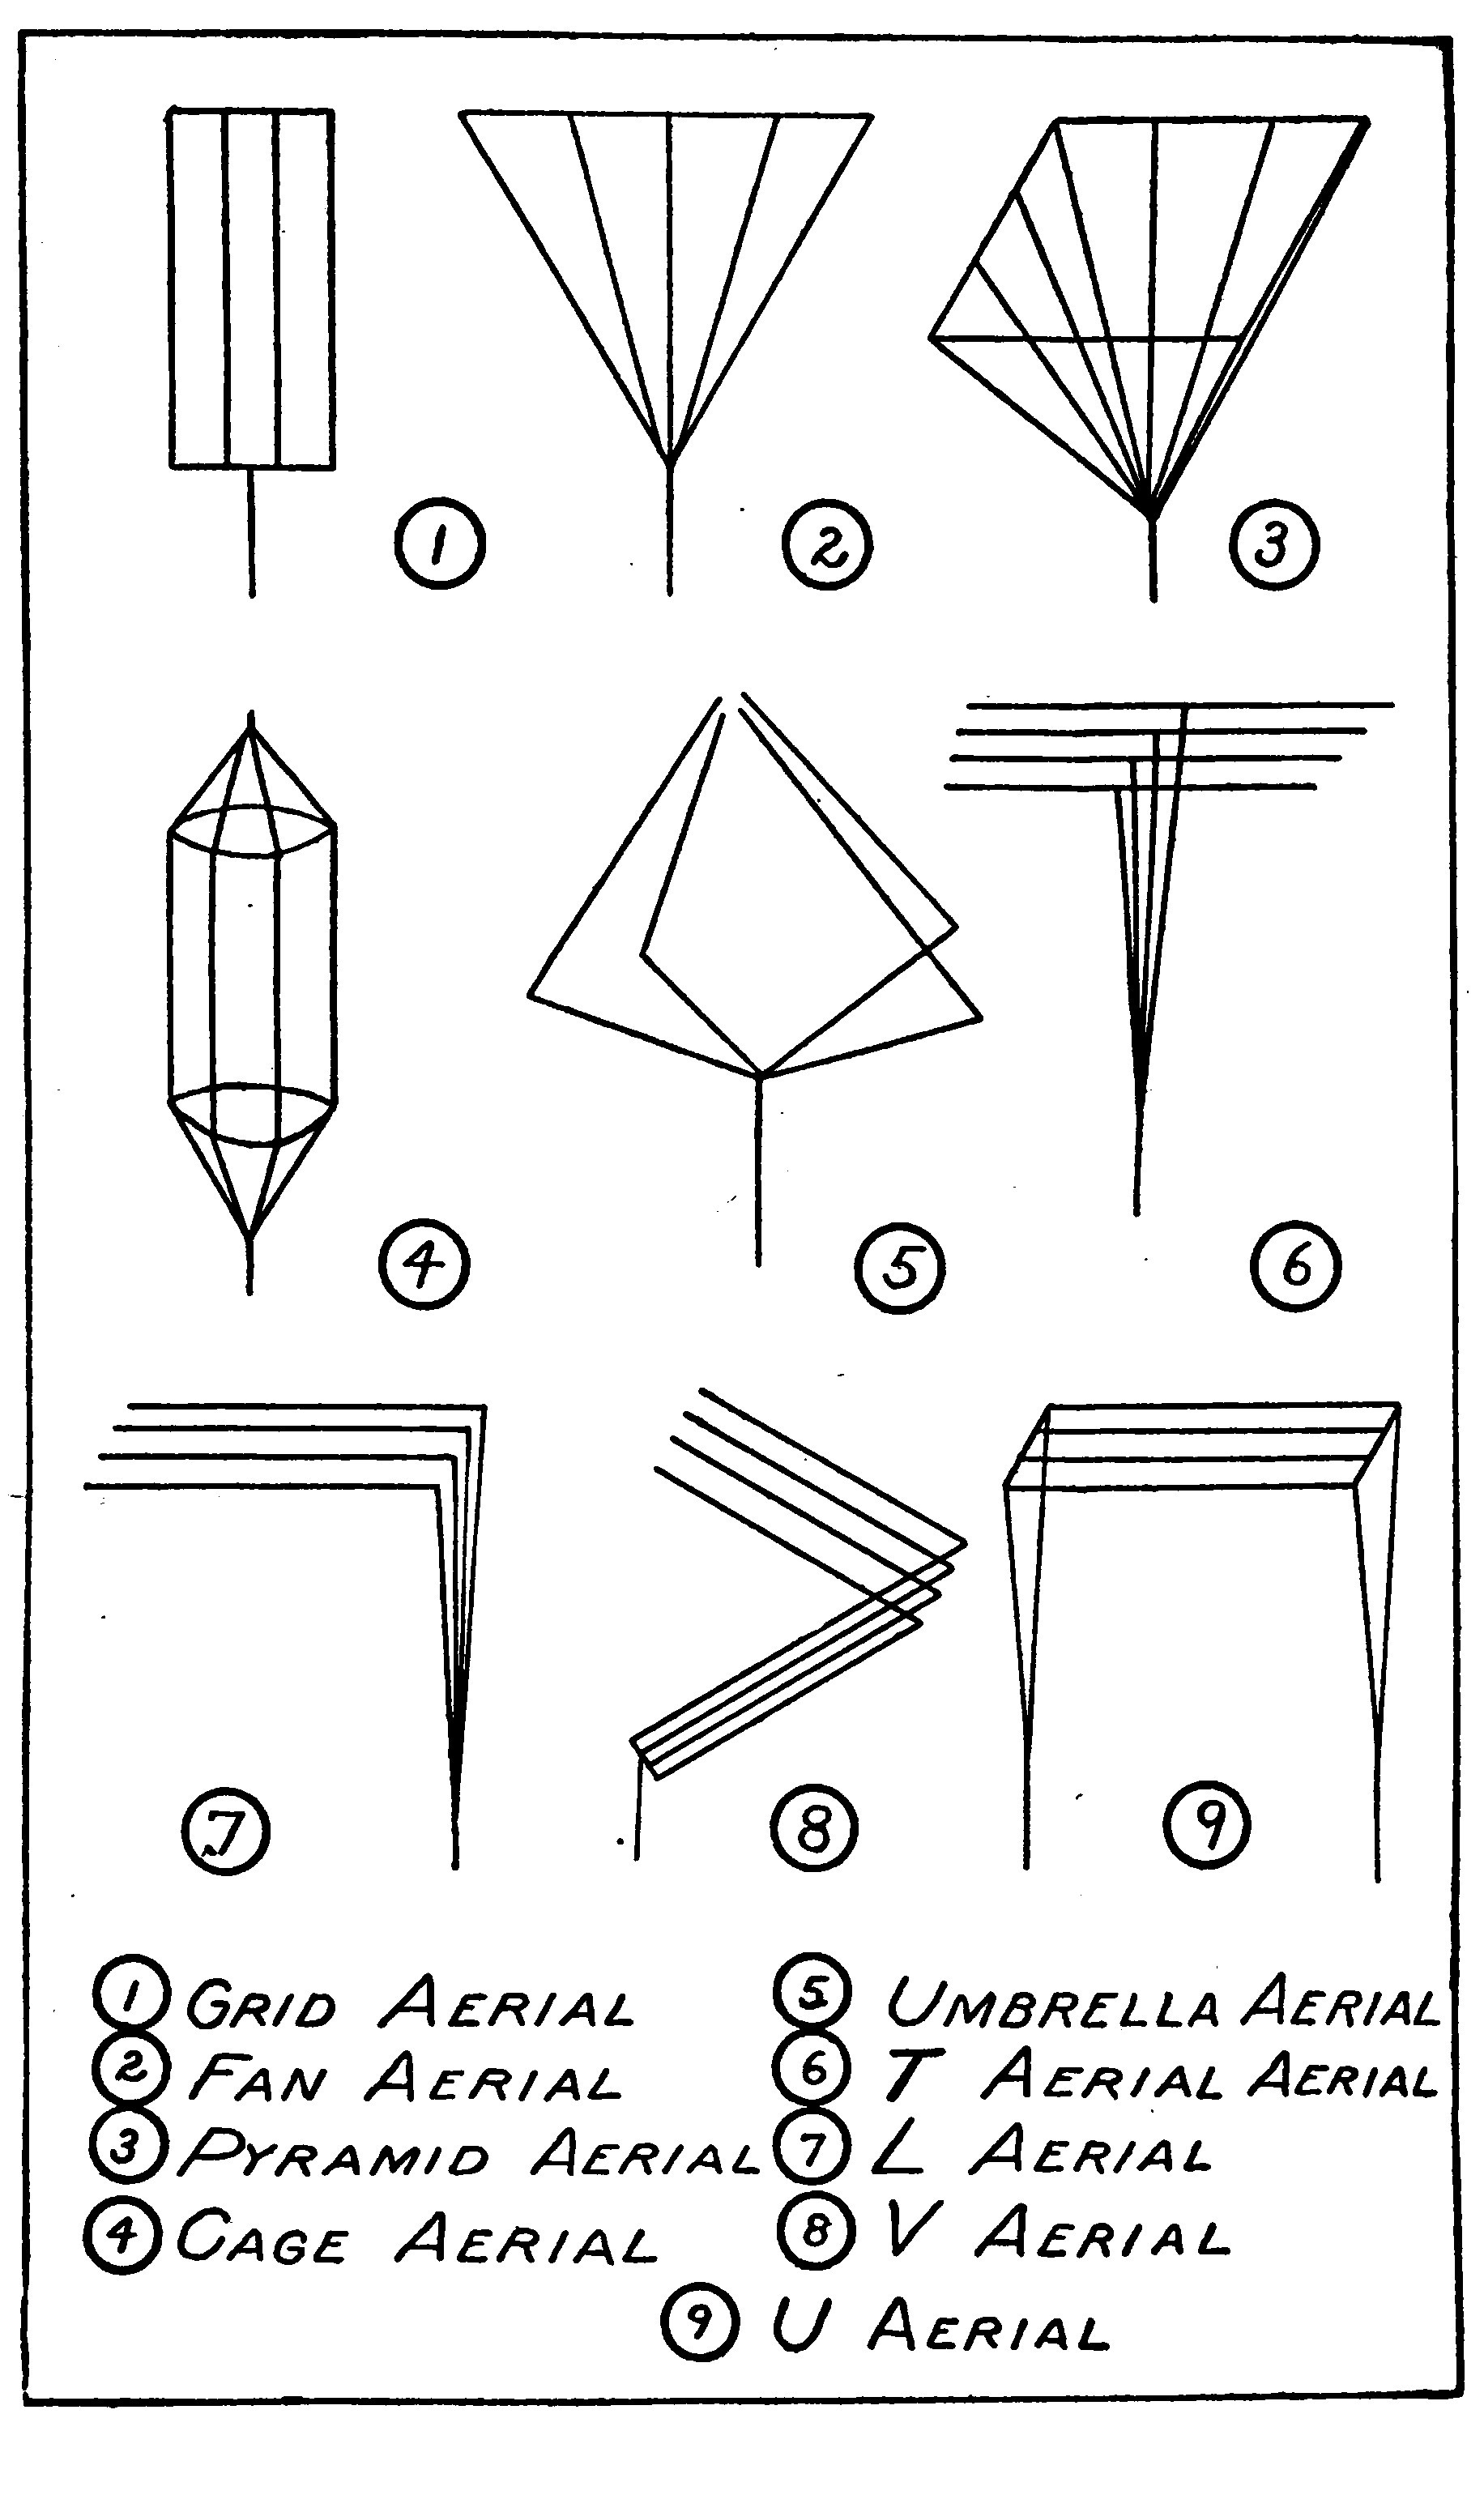 FIG. 28. General Types of Aerials